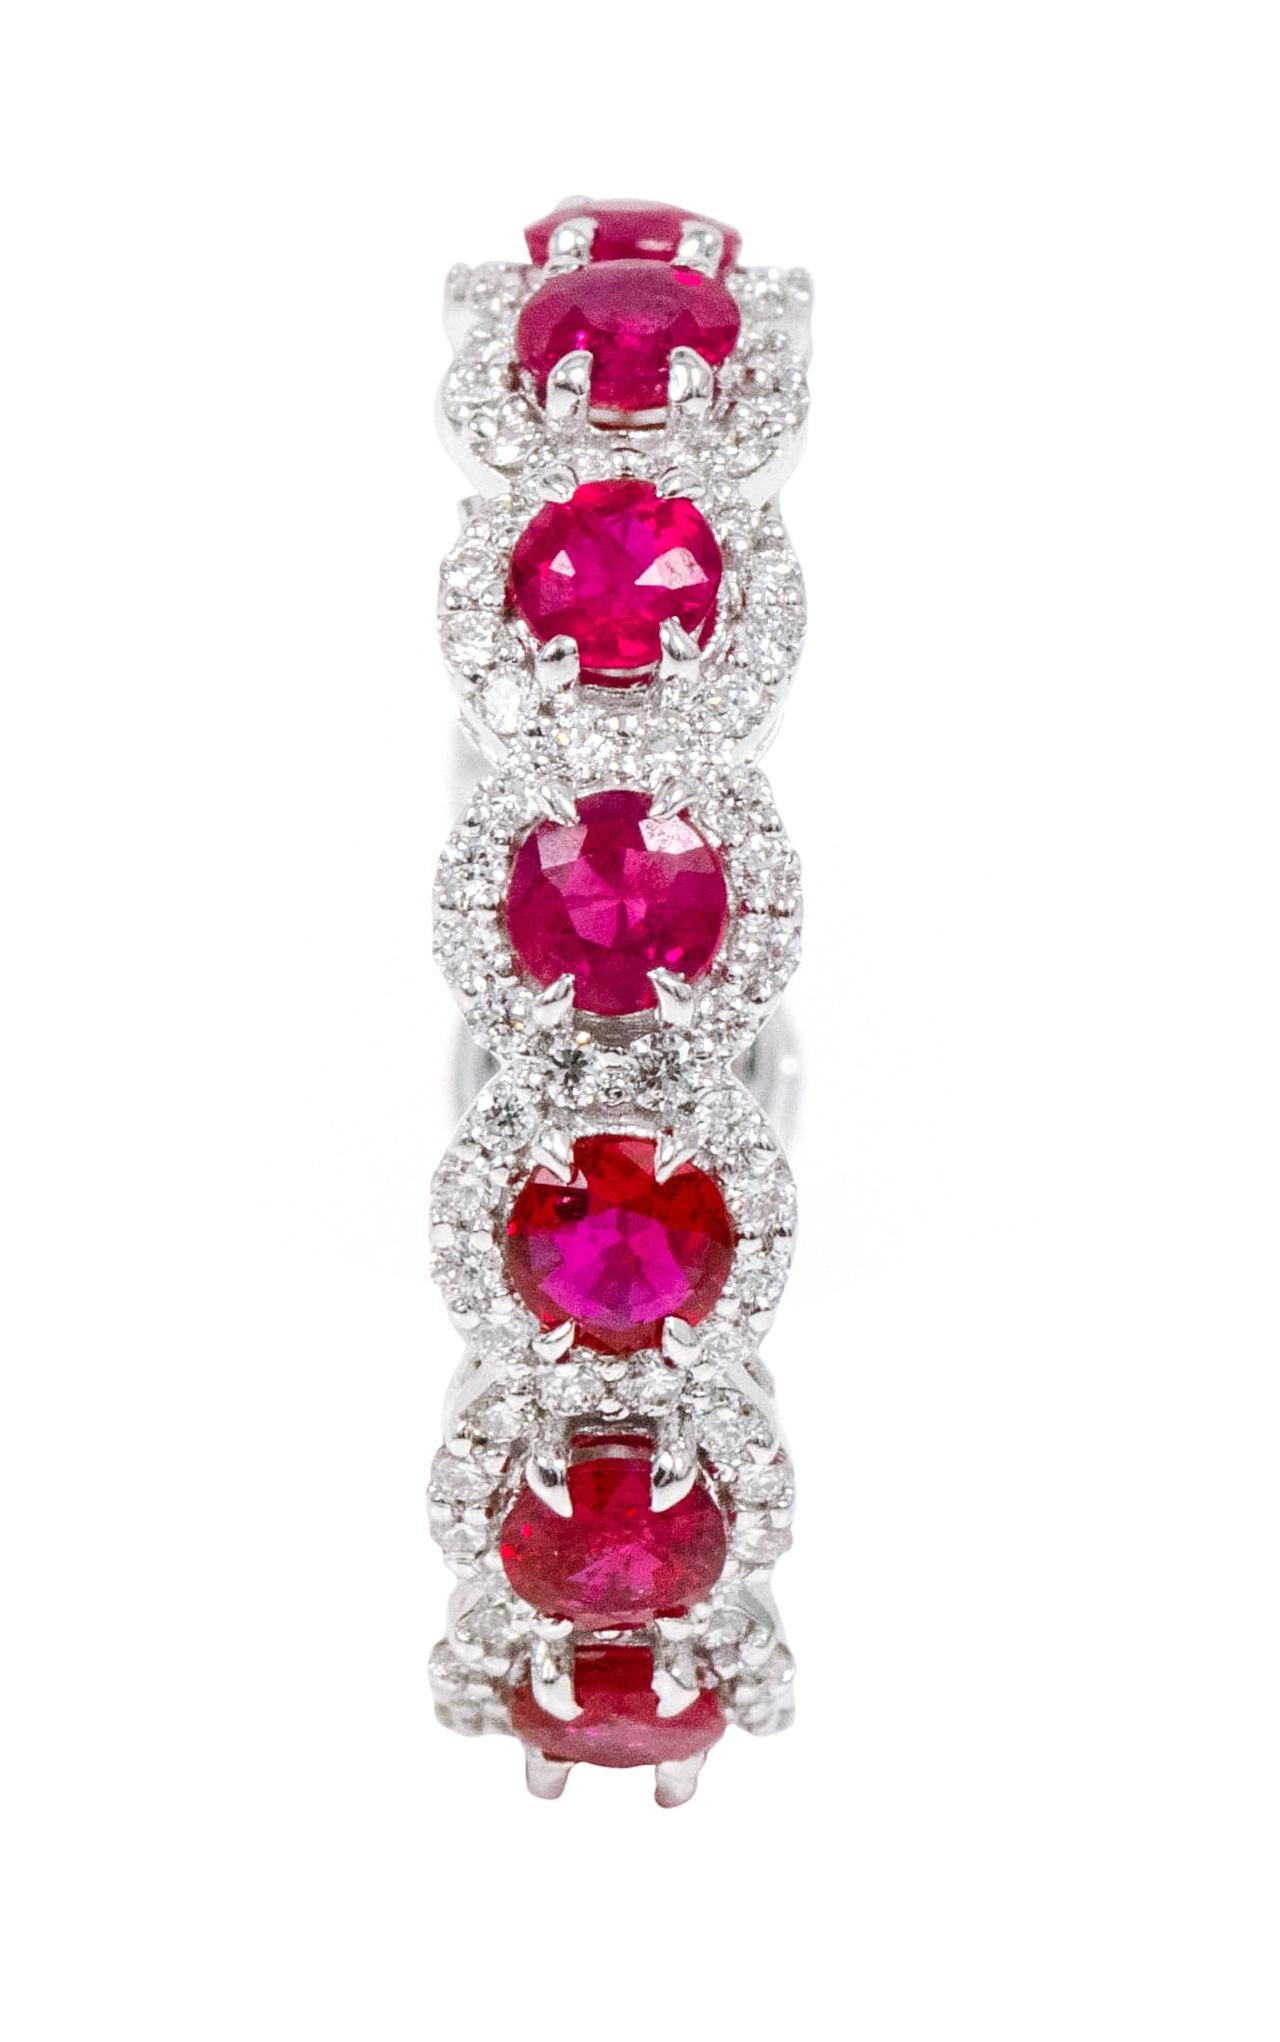 18 Karat White Gold 3.39 Carat Ruby and Diamond Cluster Eternity Band Ring

This sensational scarlet red ruby and diamond cluster band is timeless. The solitaire round cut rubies in eagle prong setting are elegantly surrounded with a merged layer of